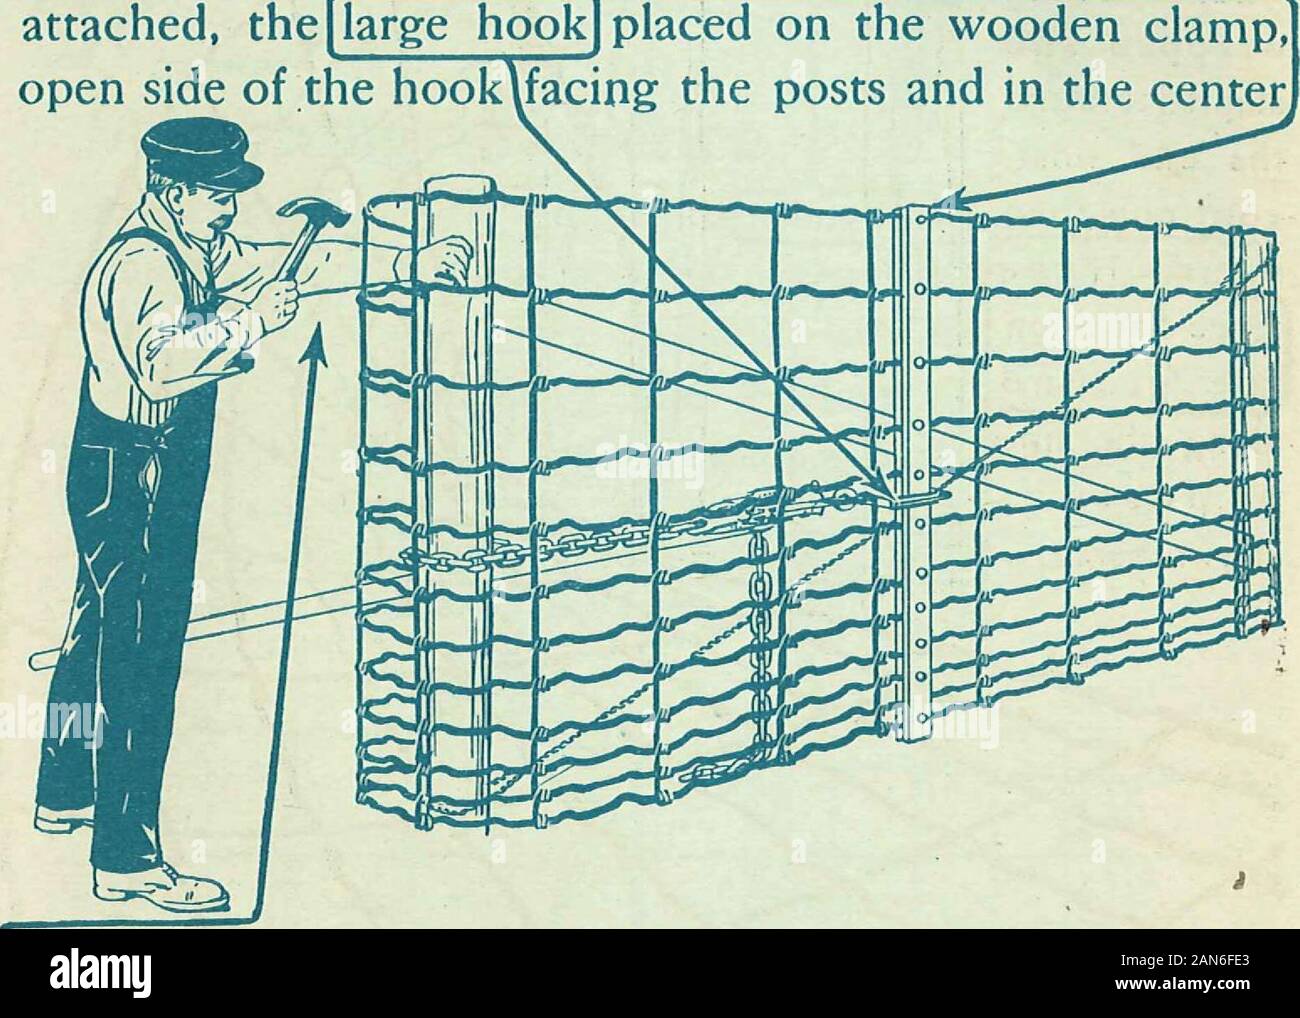 American Fence, Catalog no27 . Splicing the Fence In splicingone roll offence to an-other thewires hav-ing beenwrappedaroundeach cor-respondingwire, thewillhave theneat andstrong ap-pearance asshown inthe illus-tration. American Steel & Wire Company 4Z Stretching the Fence The splicing of the two rolls of fence having been com-pleted, the fence builder proceeds to the end of the line,stretching the fence by hand as much as possible while it lies on the ground. The stretcher clamp barthen is attached, the [large hook open side of the hookfacing the posts and in the centerl. of the fence with Stock Photo